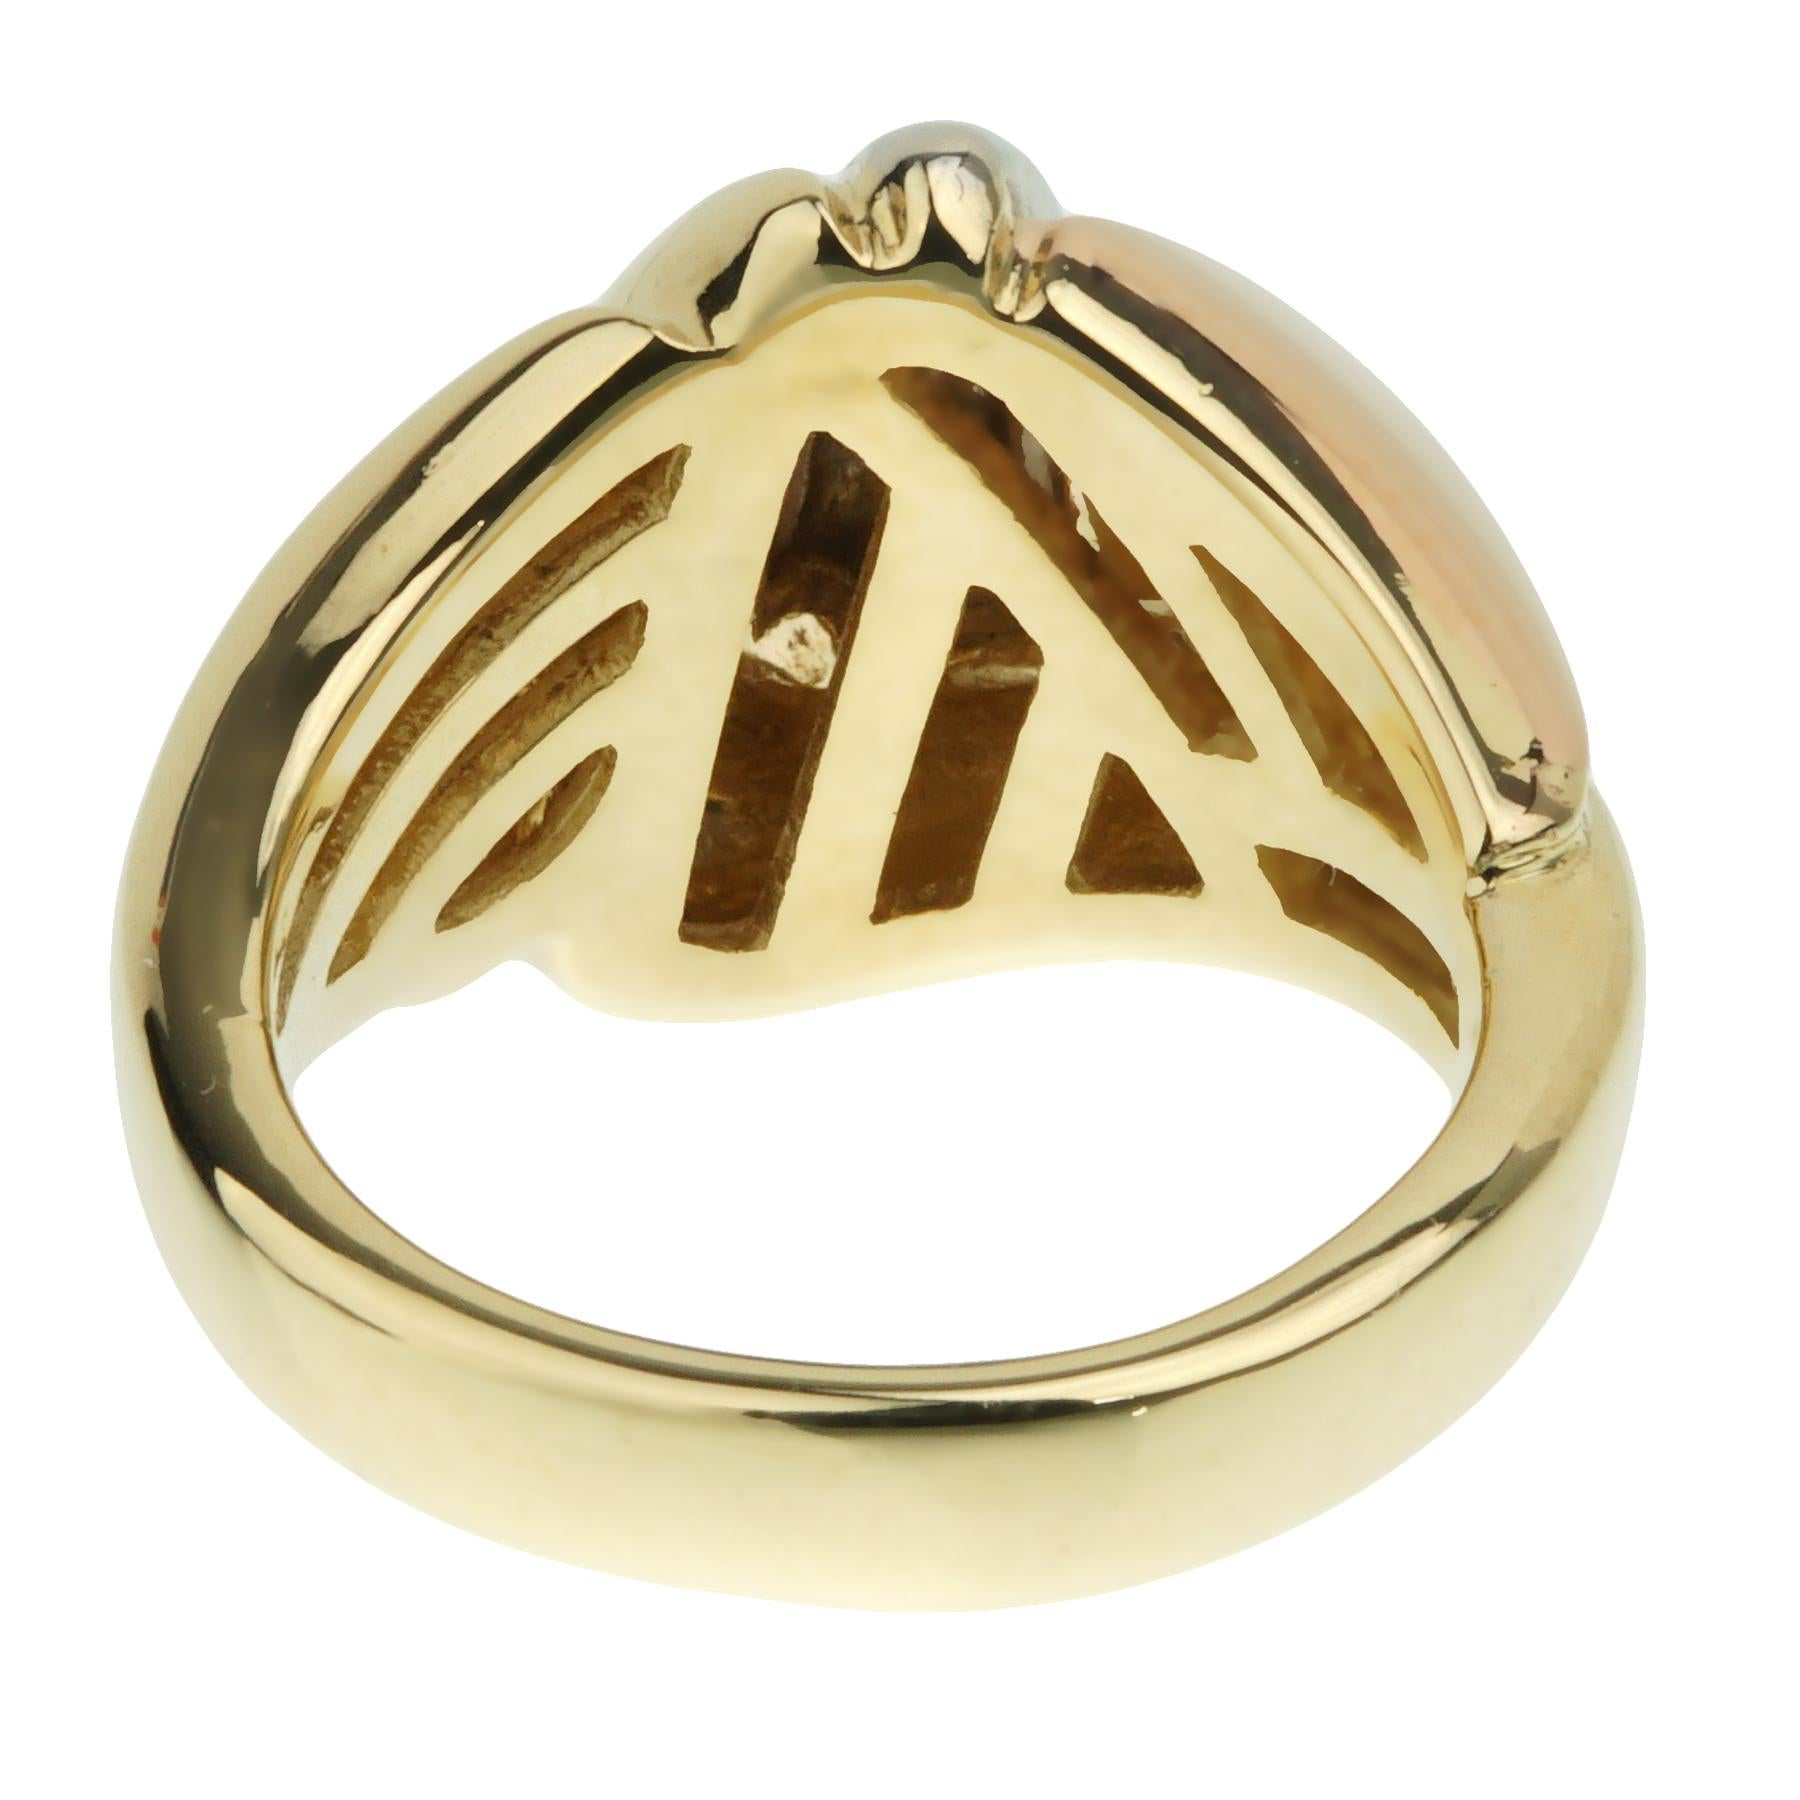 Bvlgari Vintage Tricolor Gold Cocktail Ring In Excellent Condition For Sale In Feasterville, PA